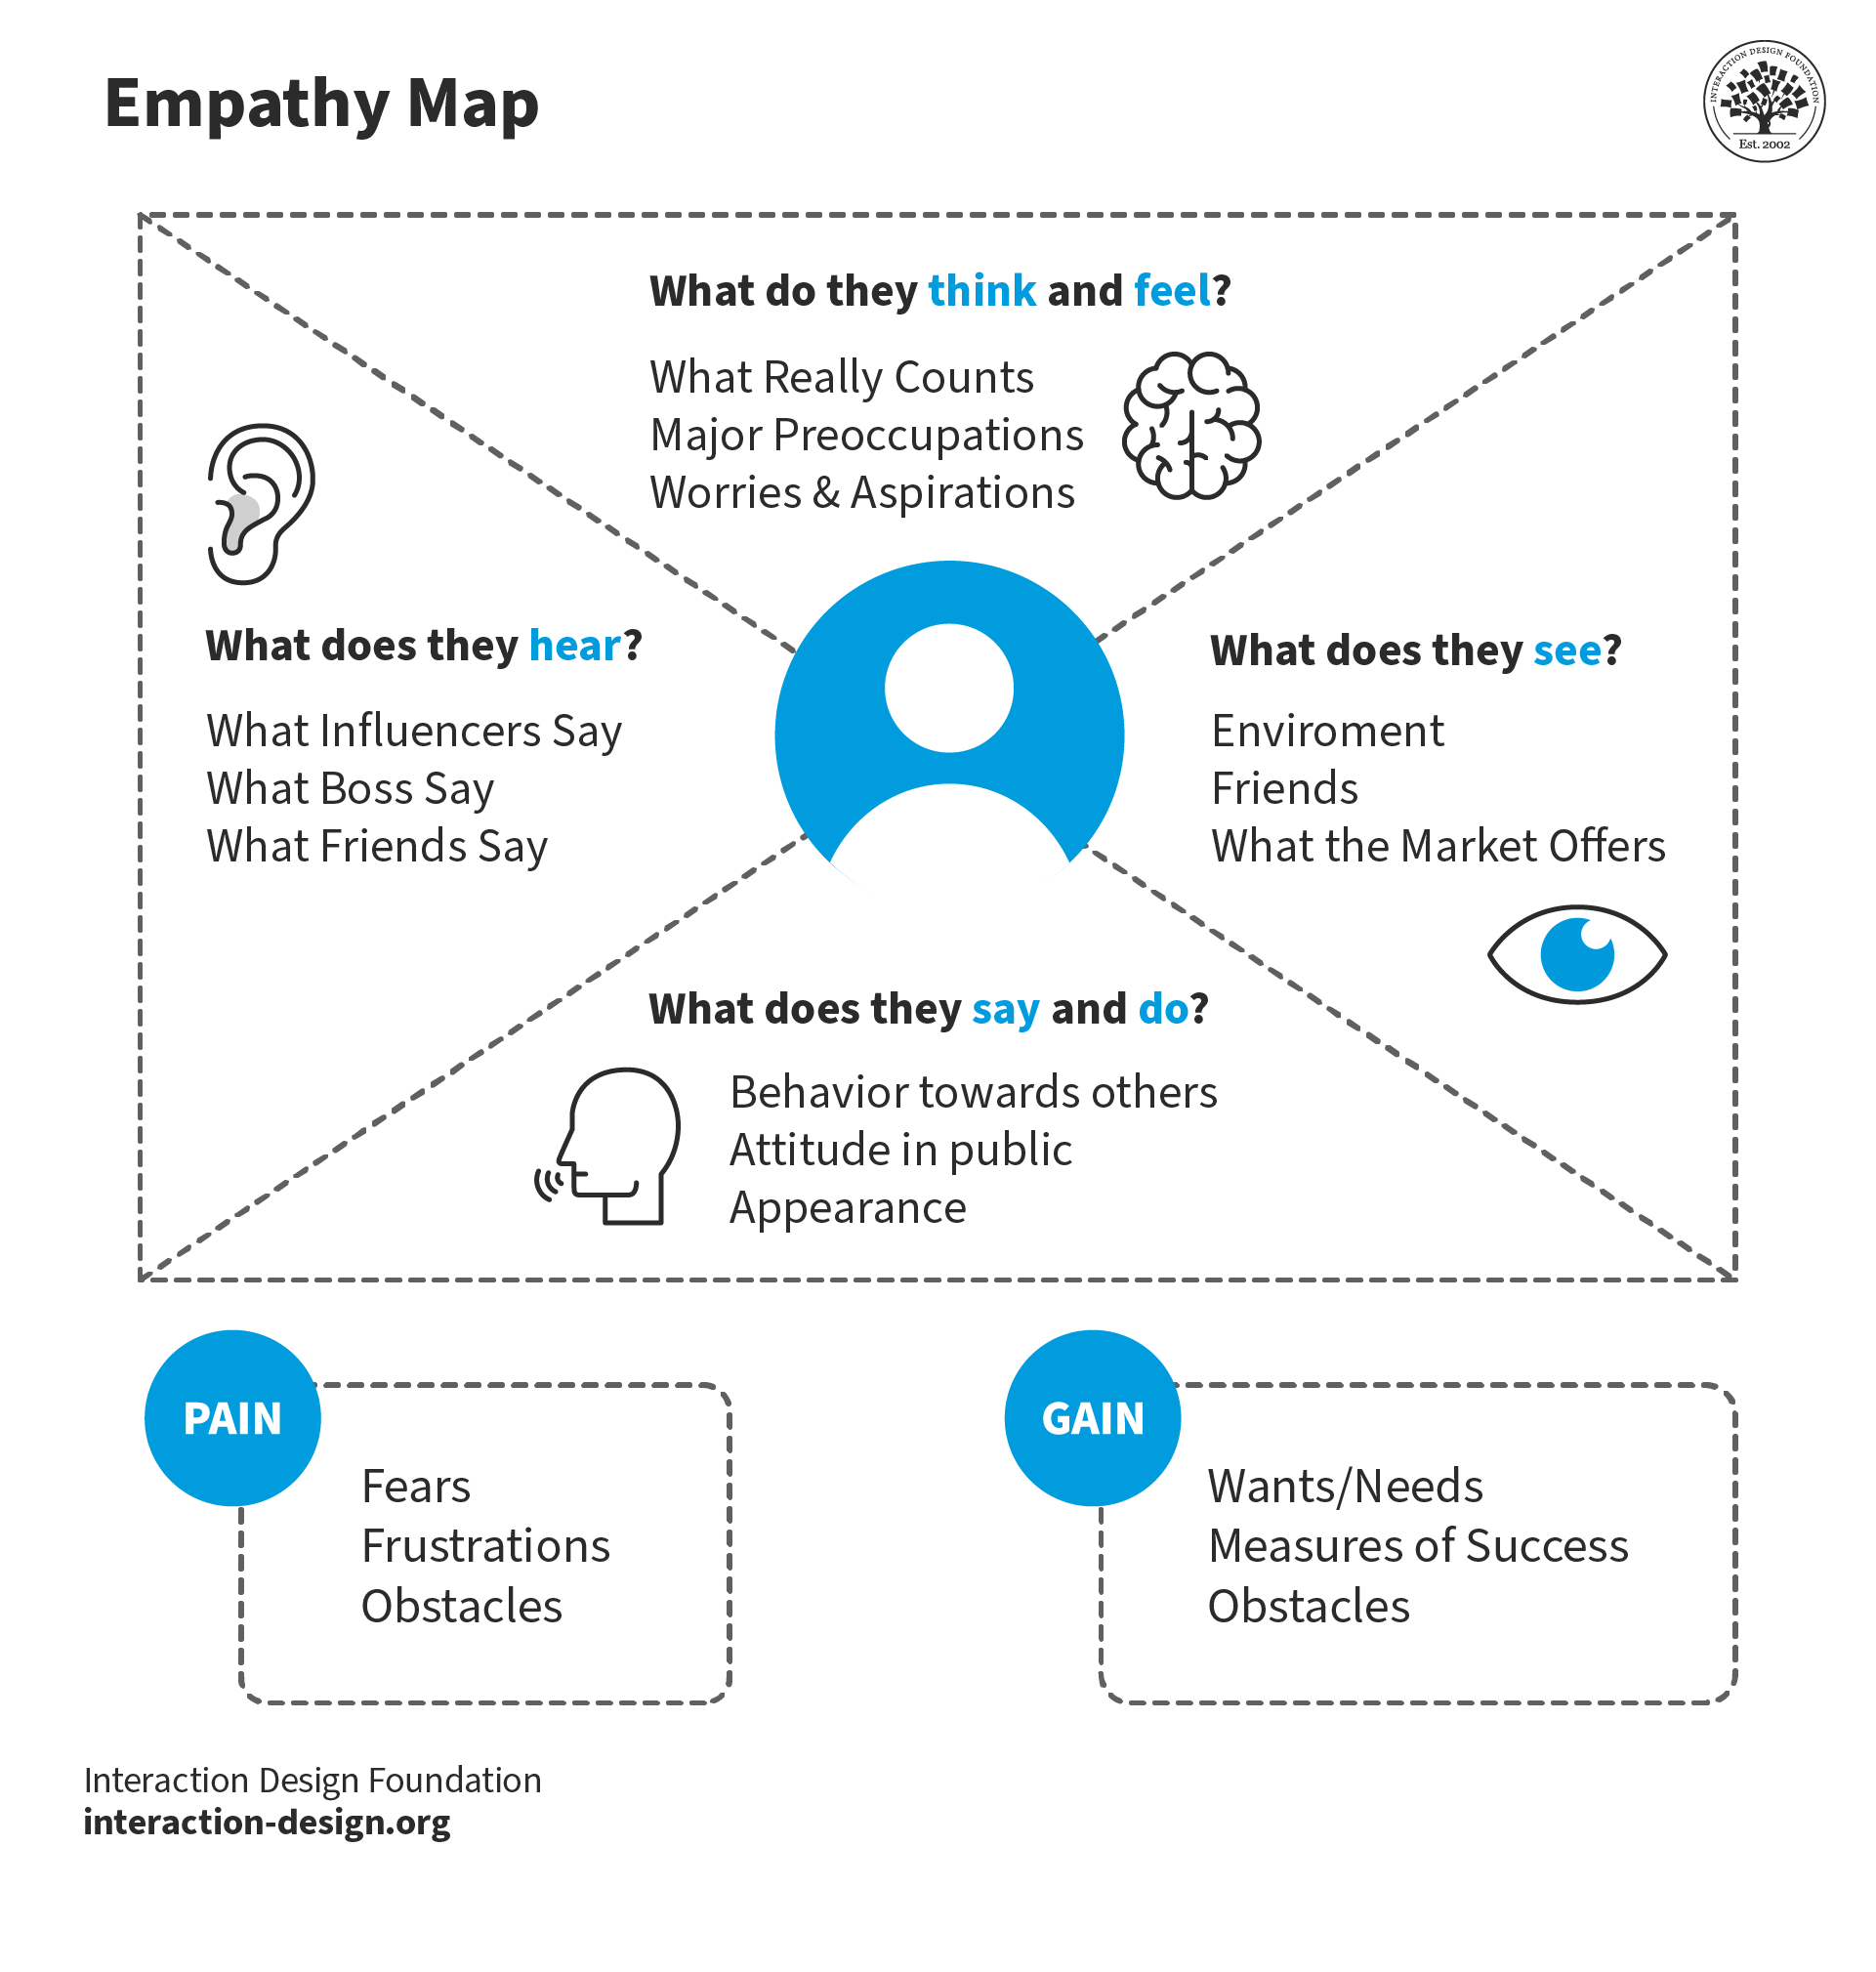 Visual Example of an Empathy map